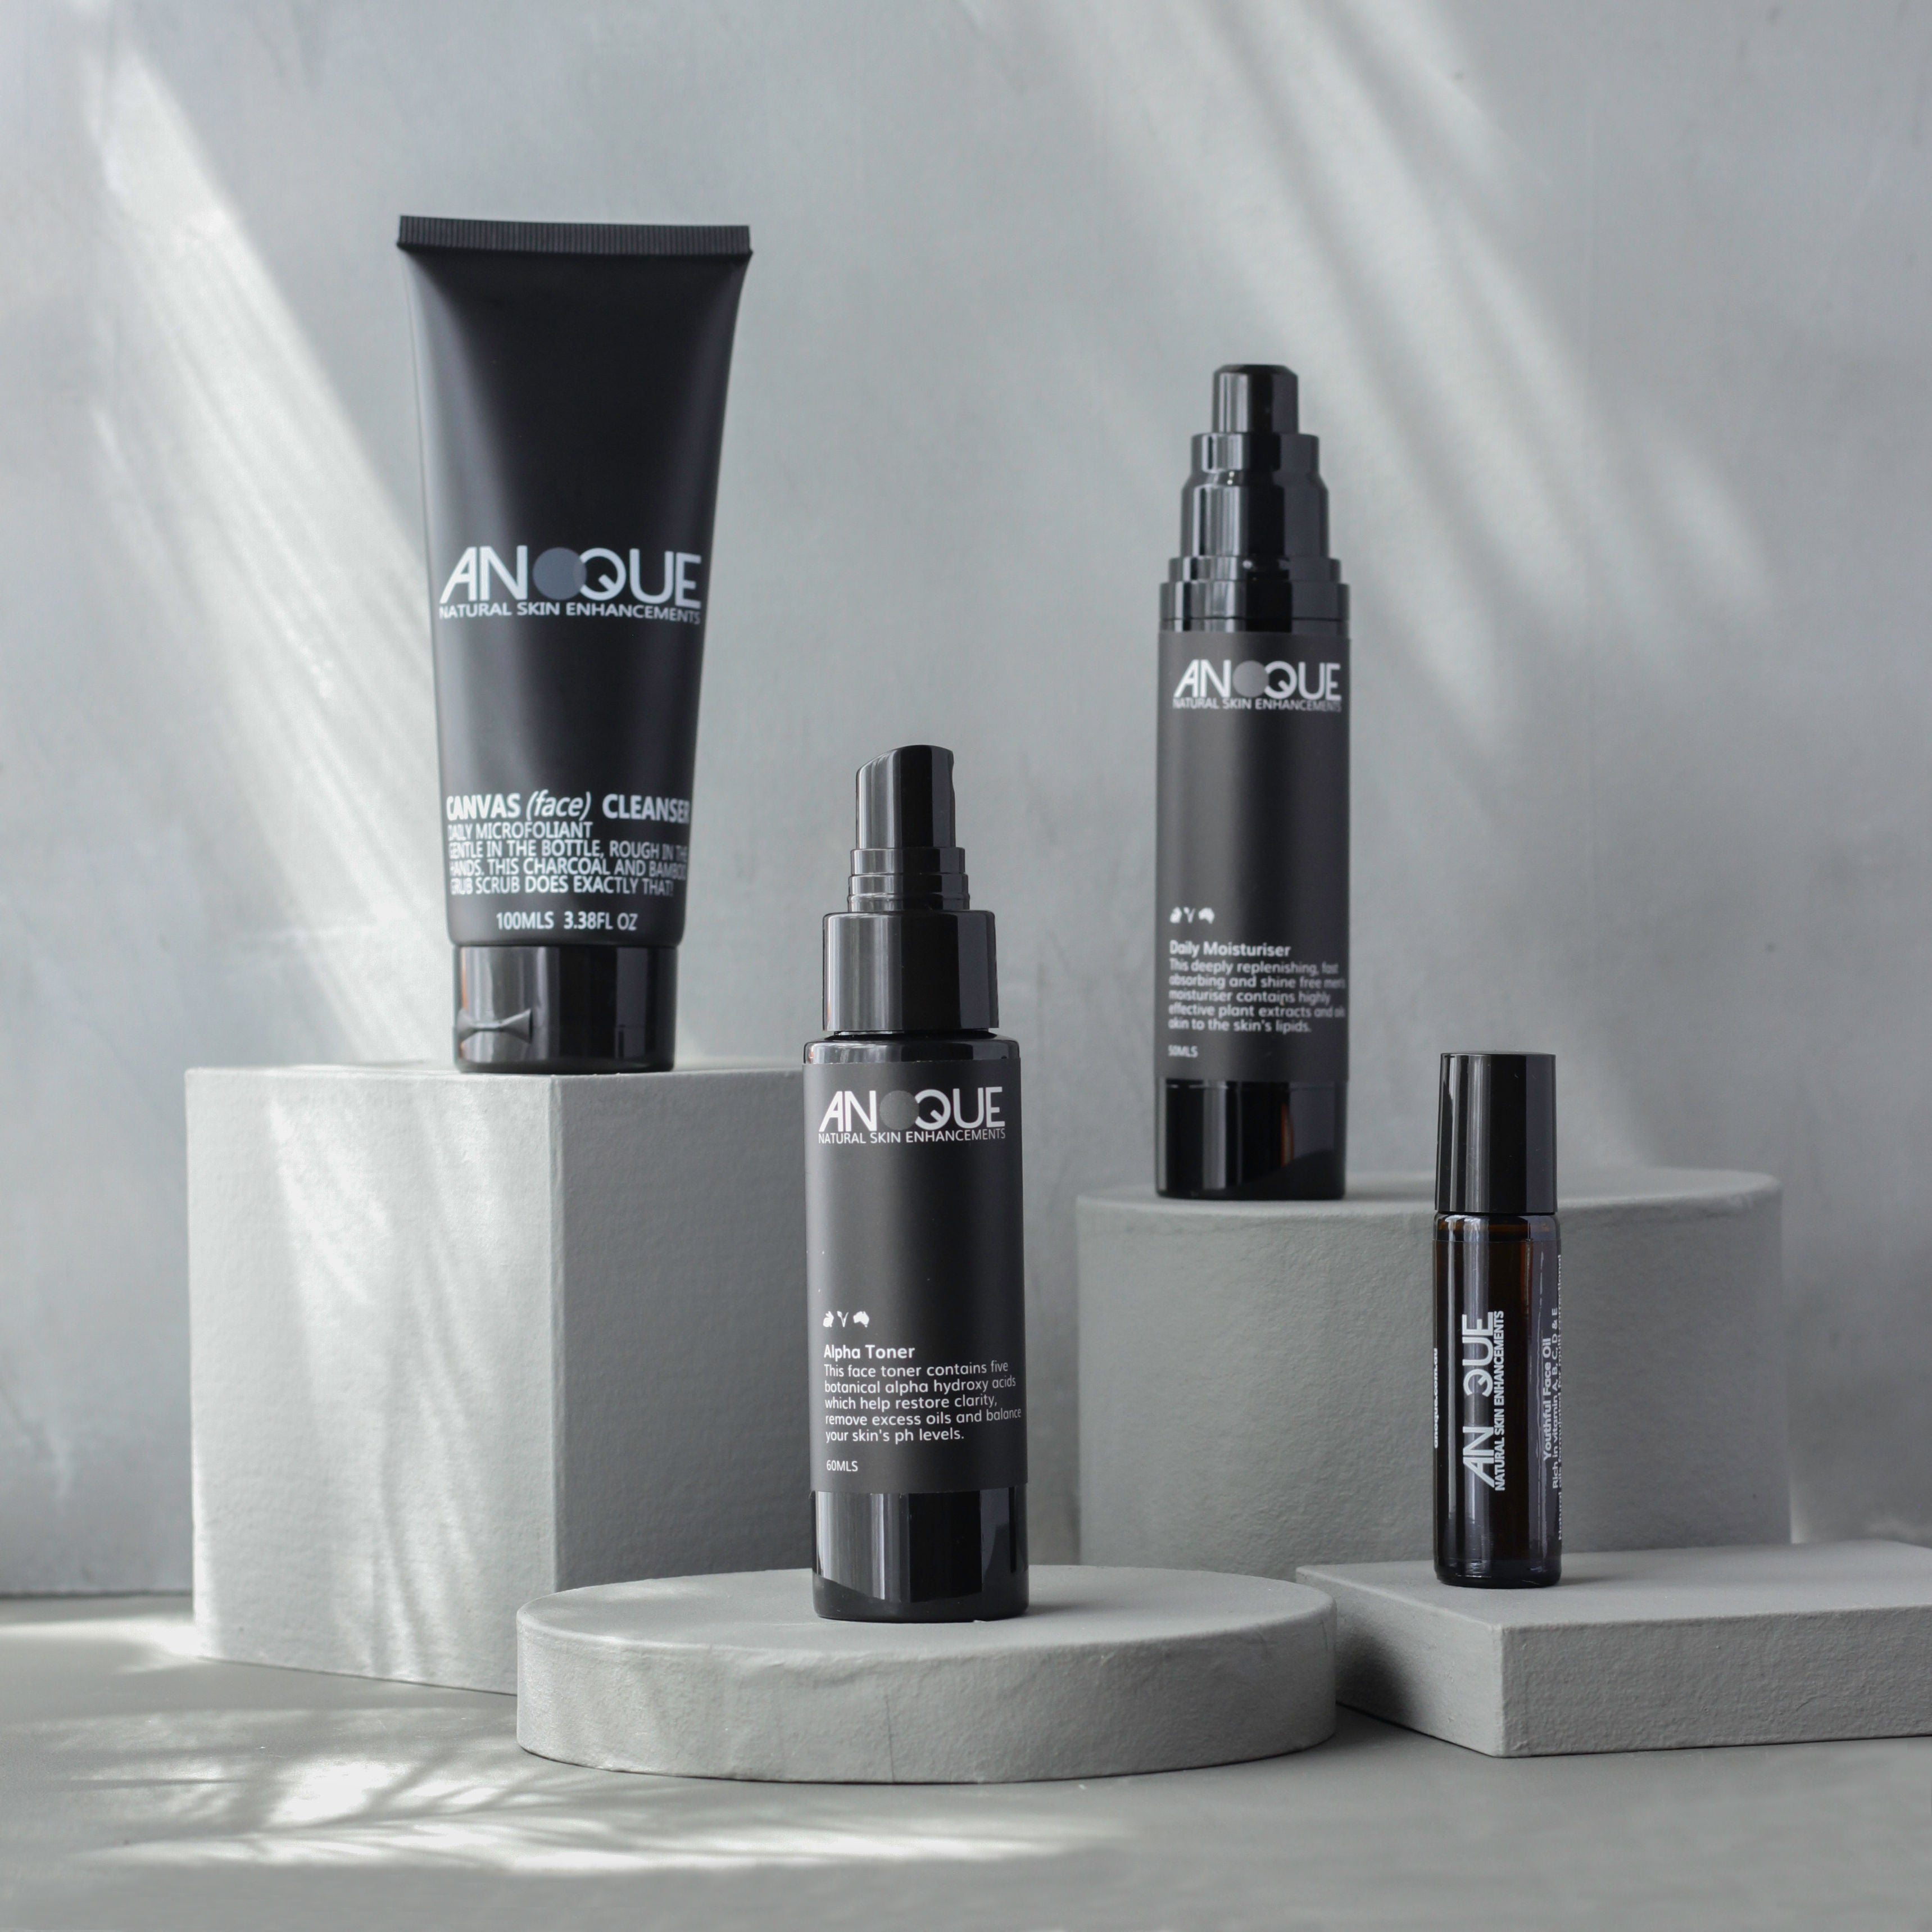 Nourish, protect, and heal: Improve your skin with our men's kempt kit